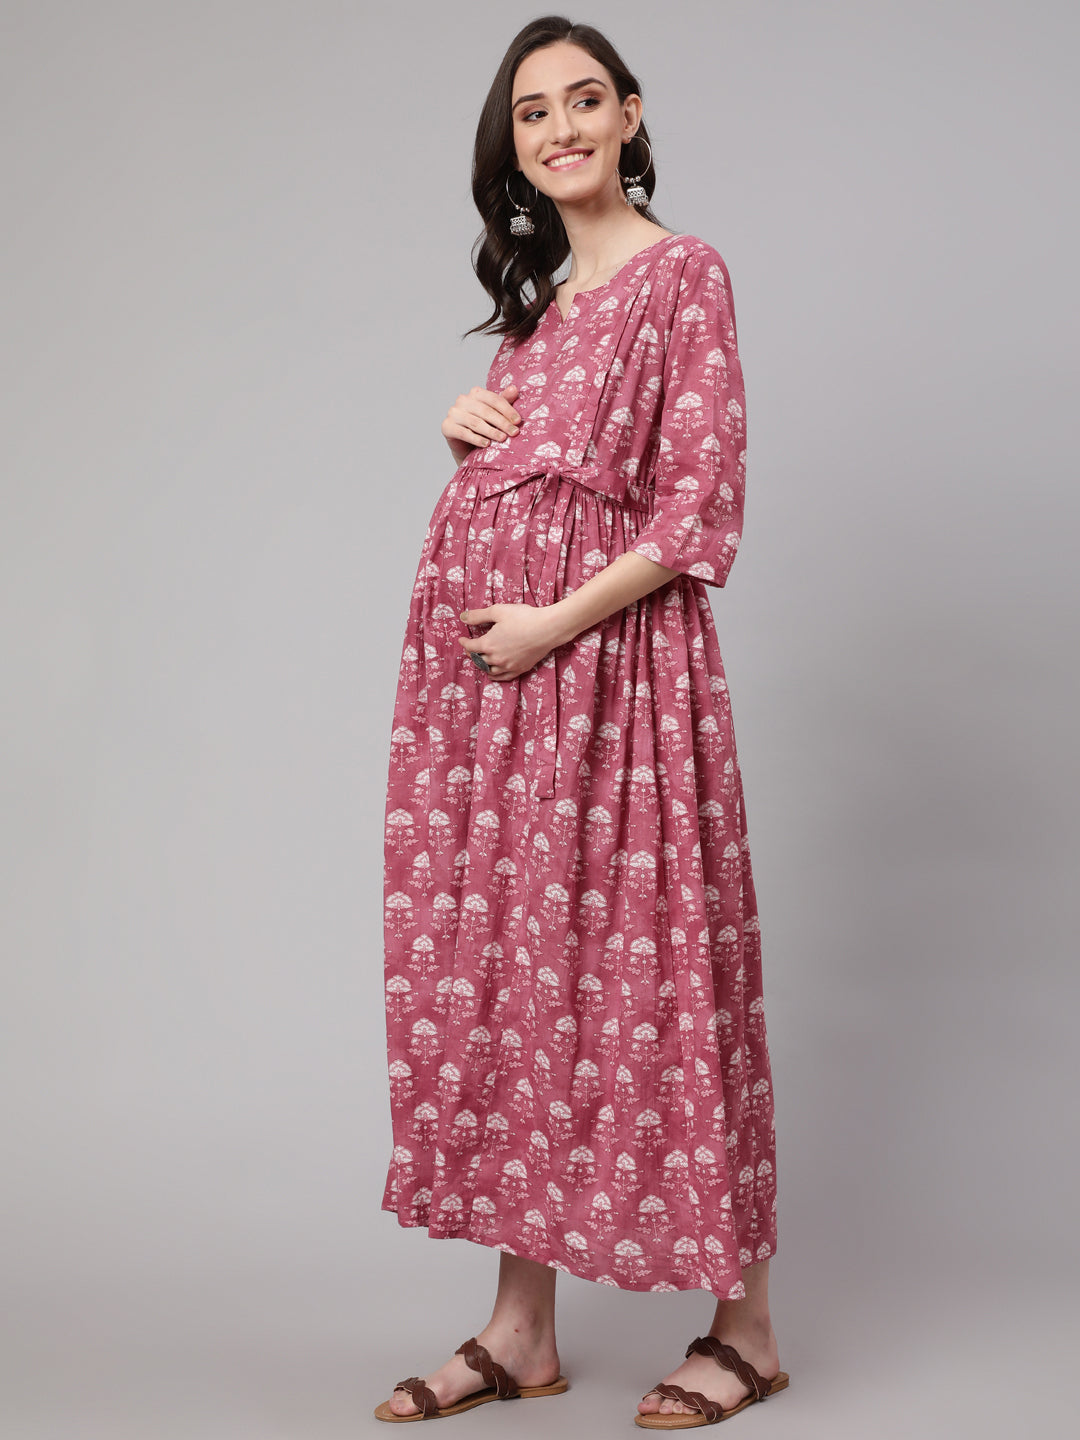 Women's Pink Floral Printed Flared Maternity Dress - Nayo Clothing